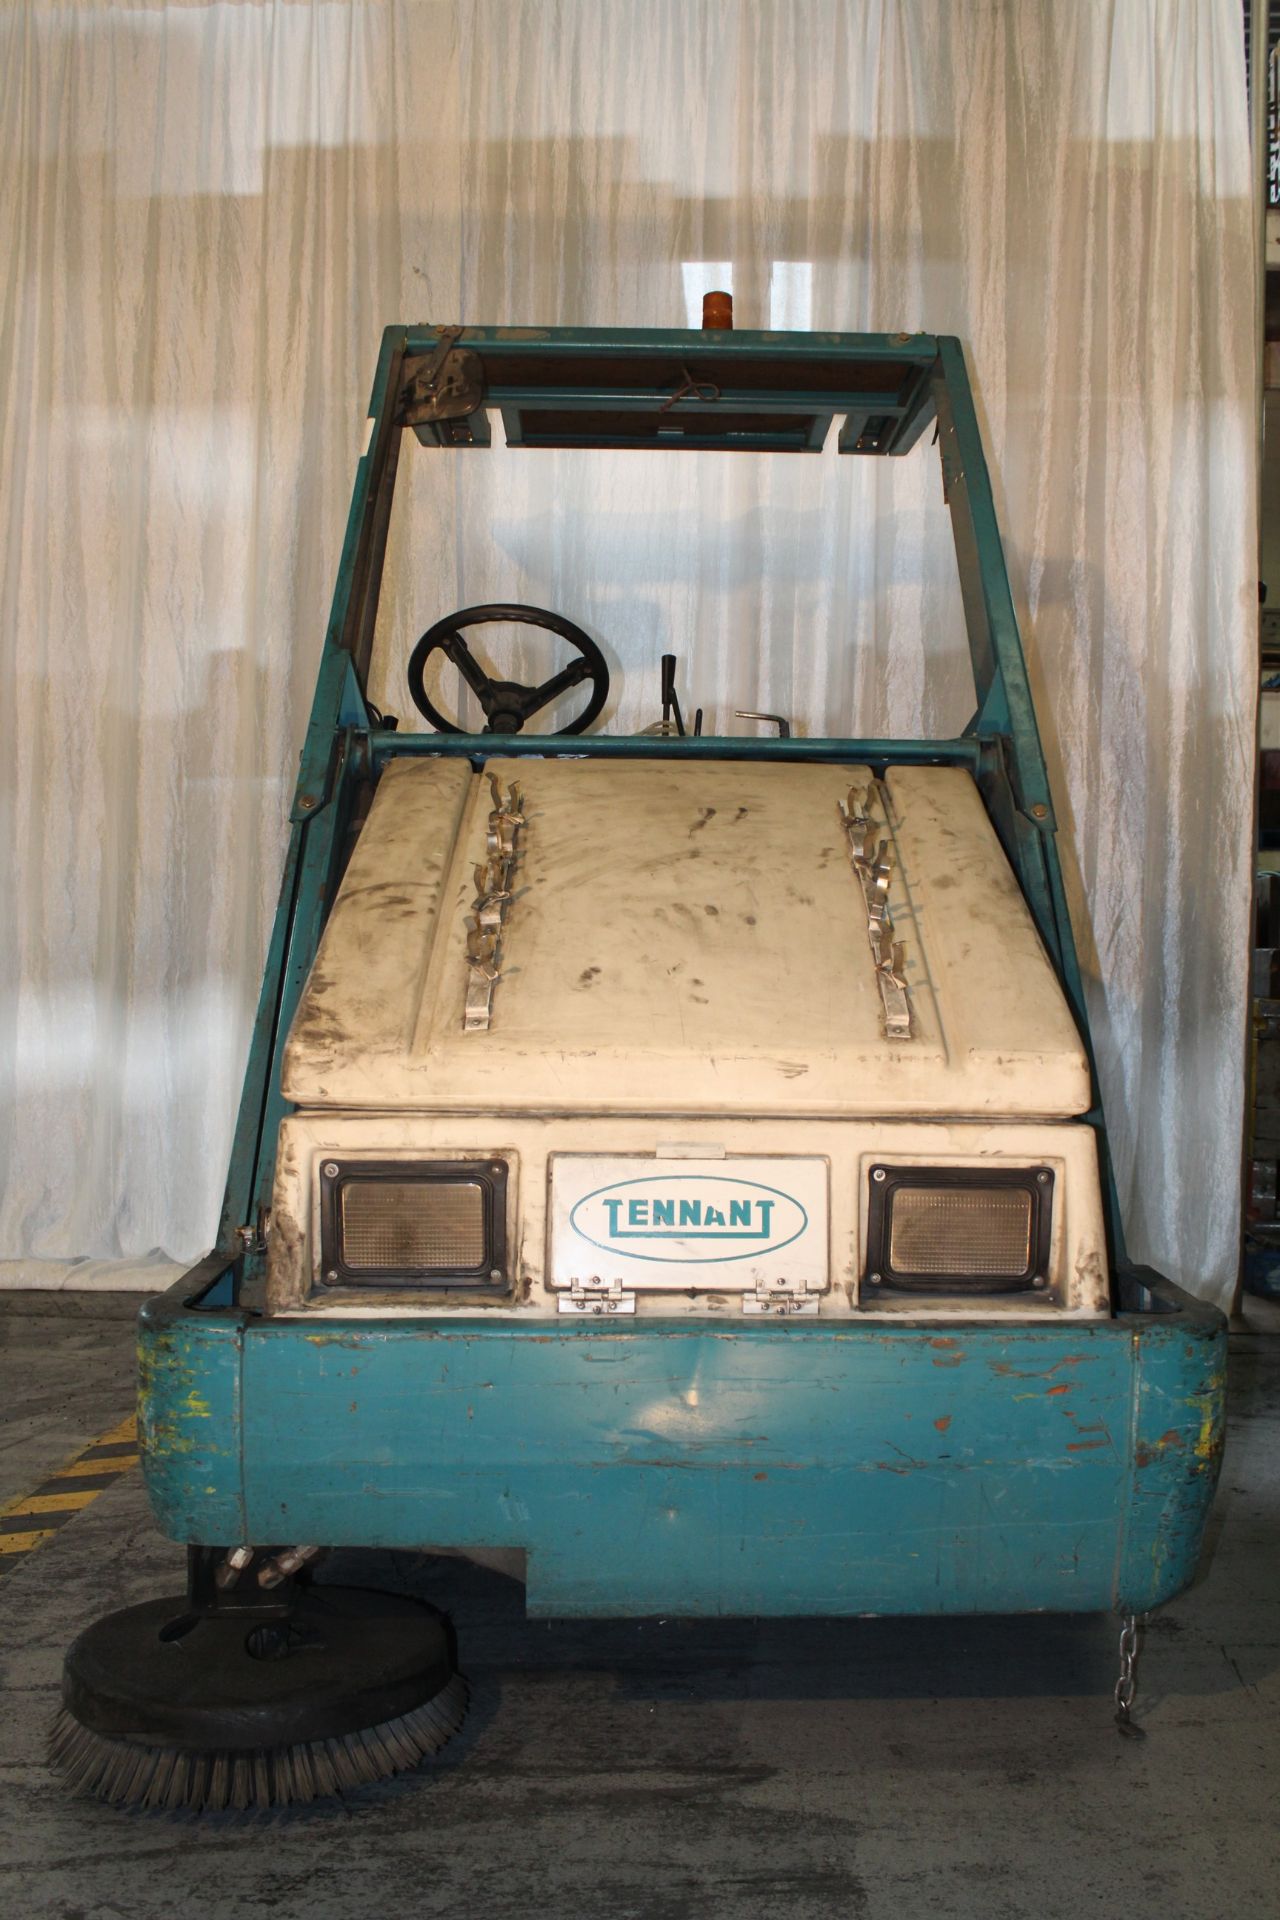 TENNANT SWEEPER - Image 11 of 13